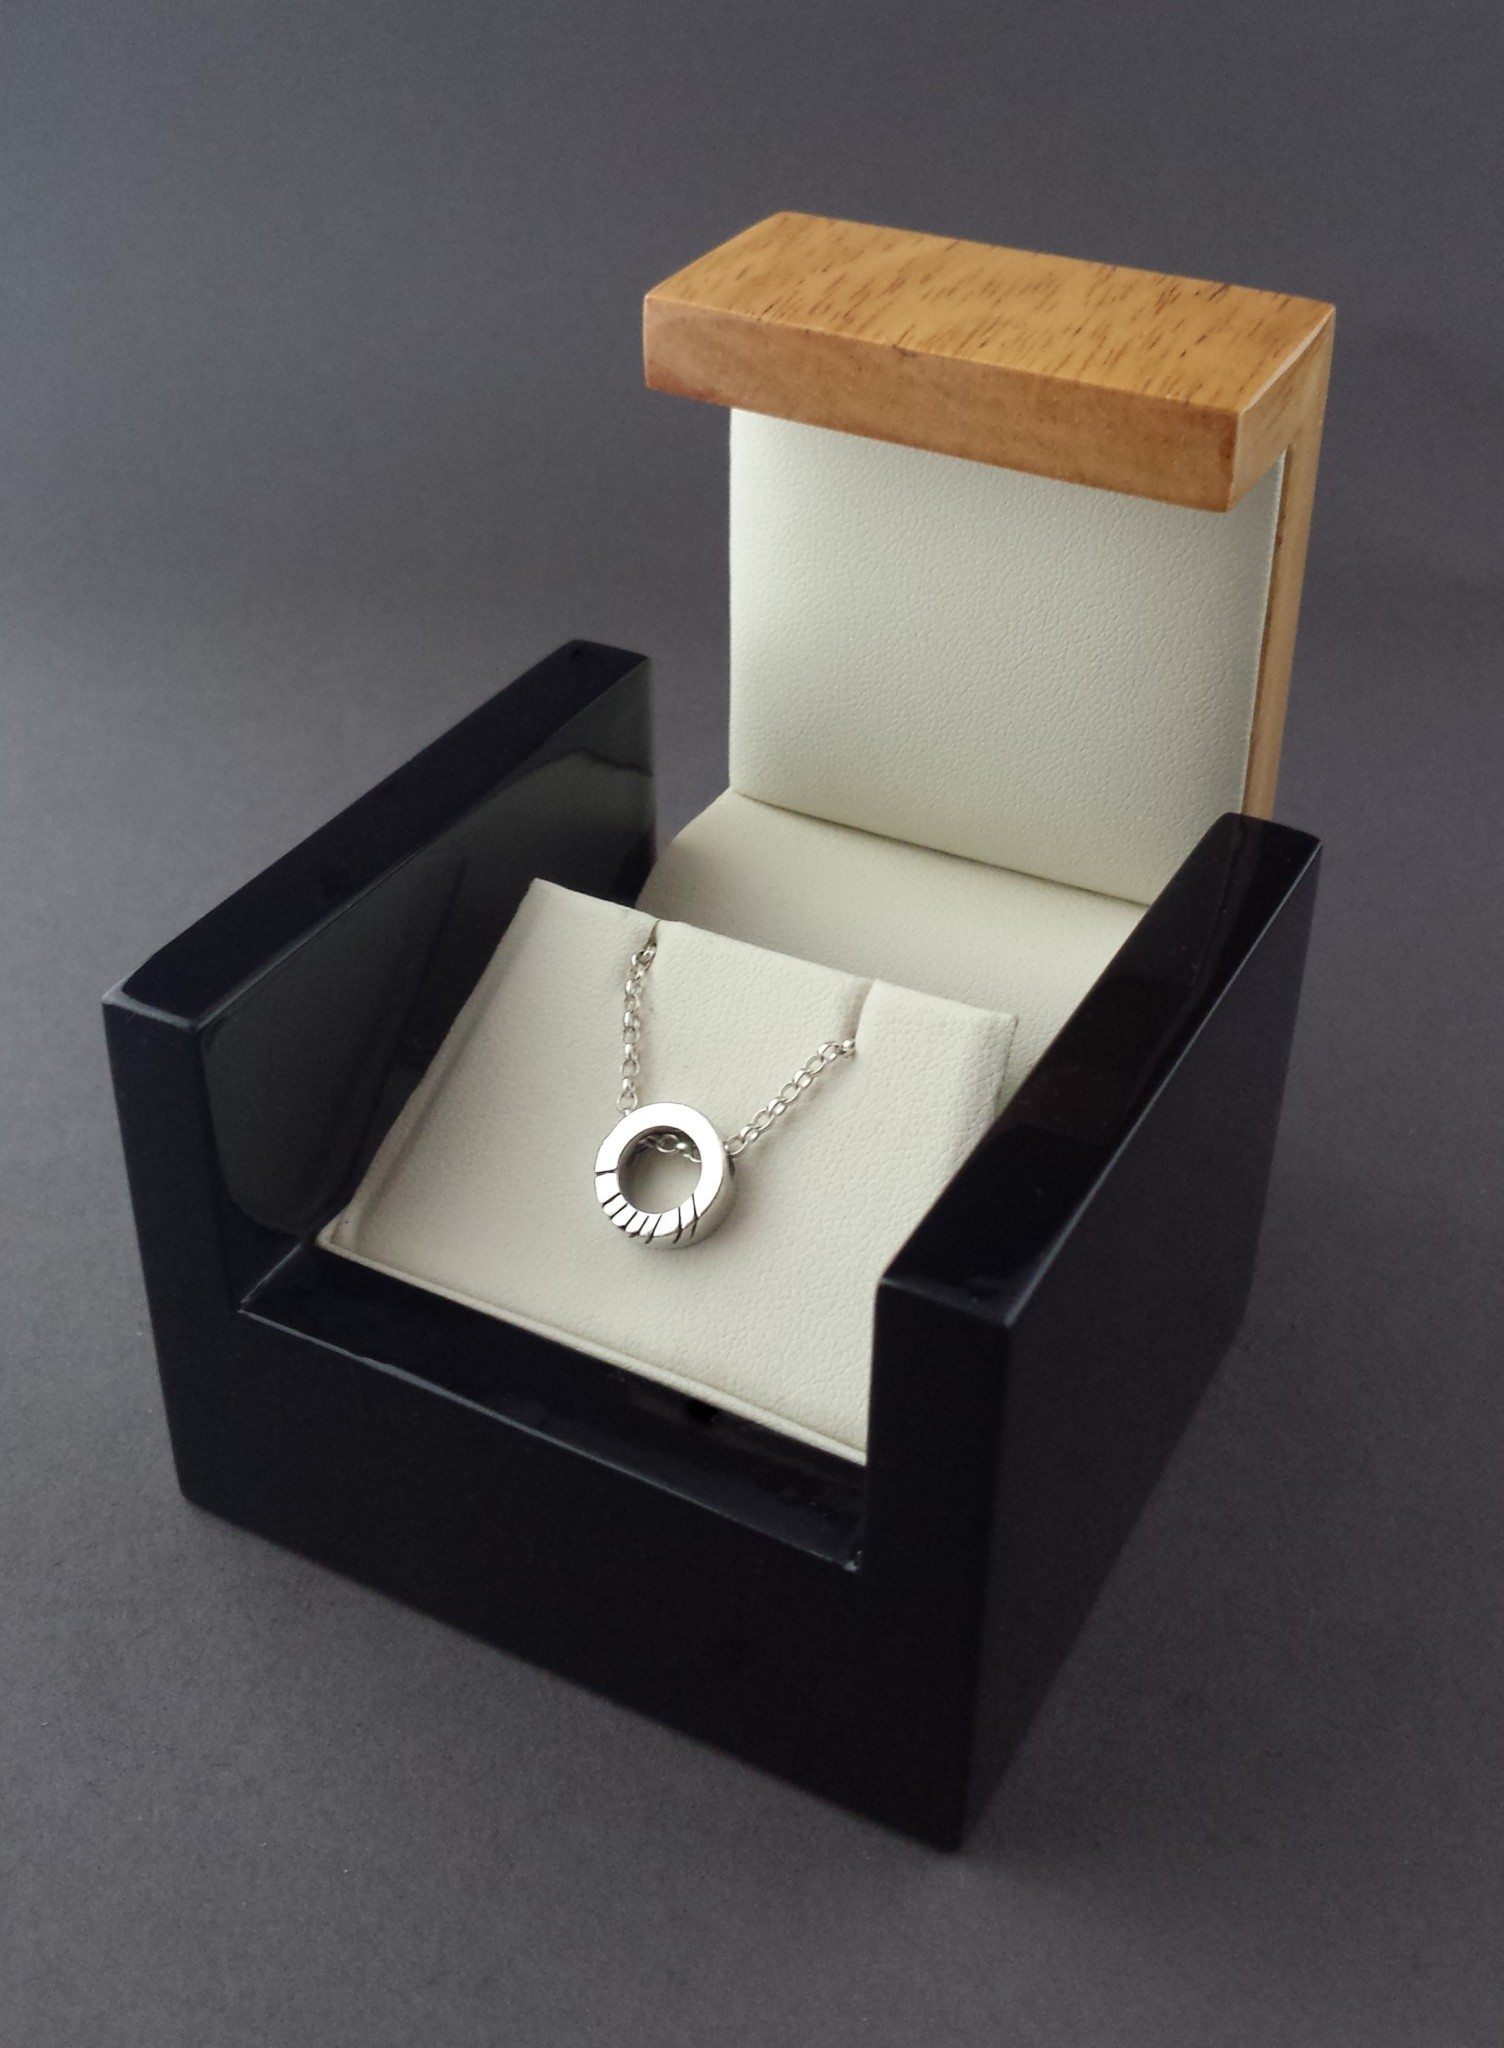 personalized ogham necklace in box